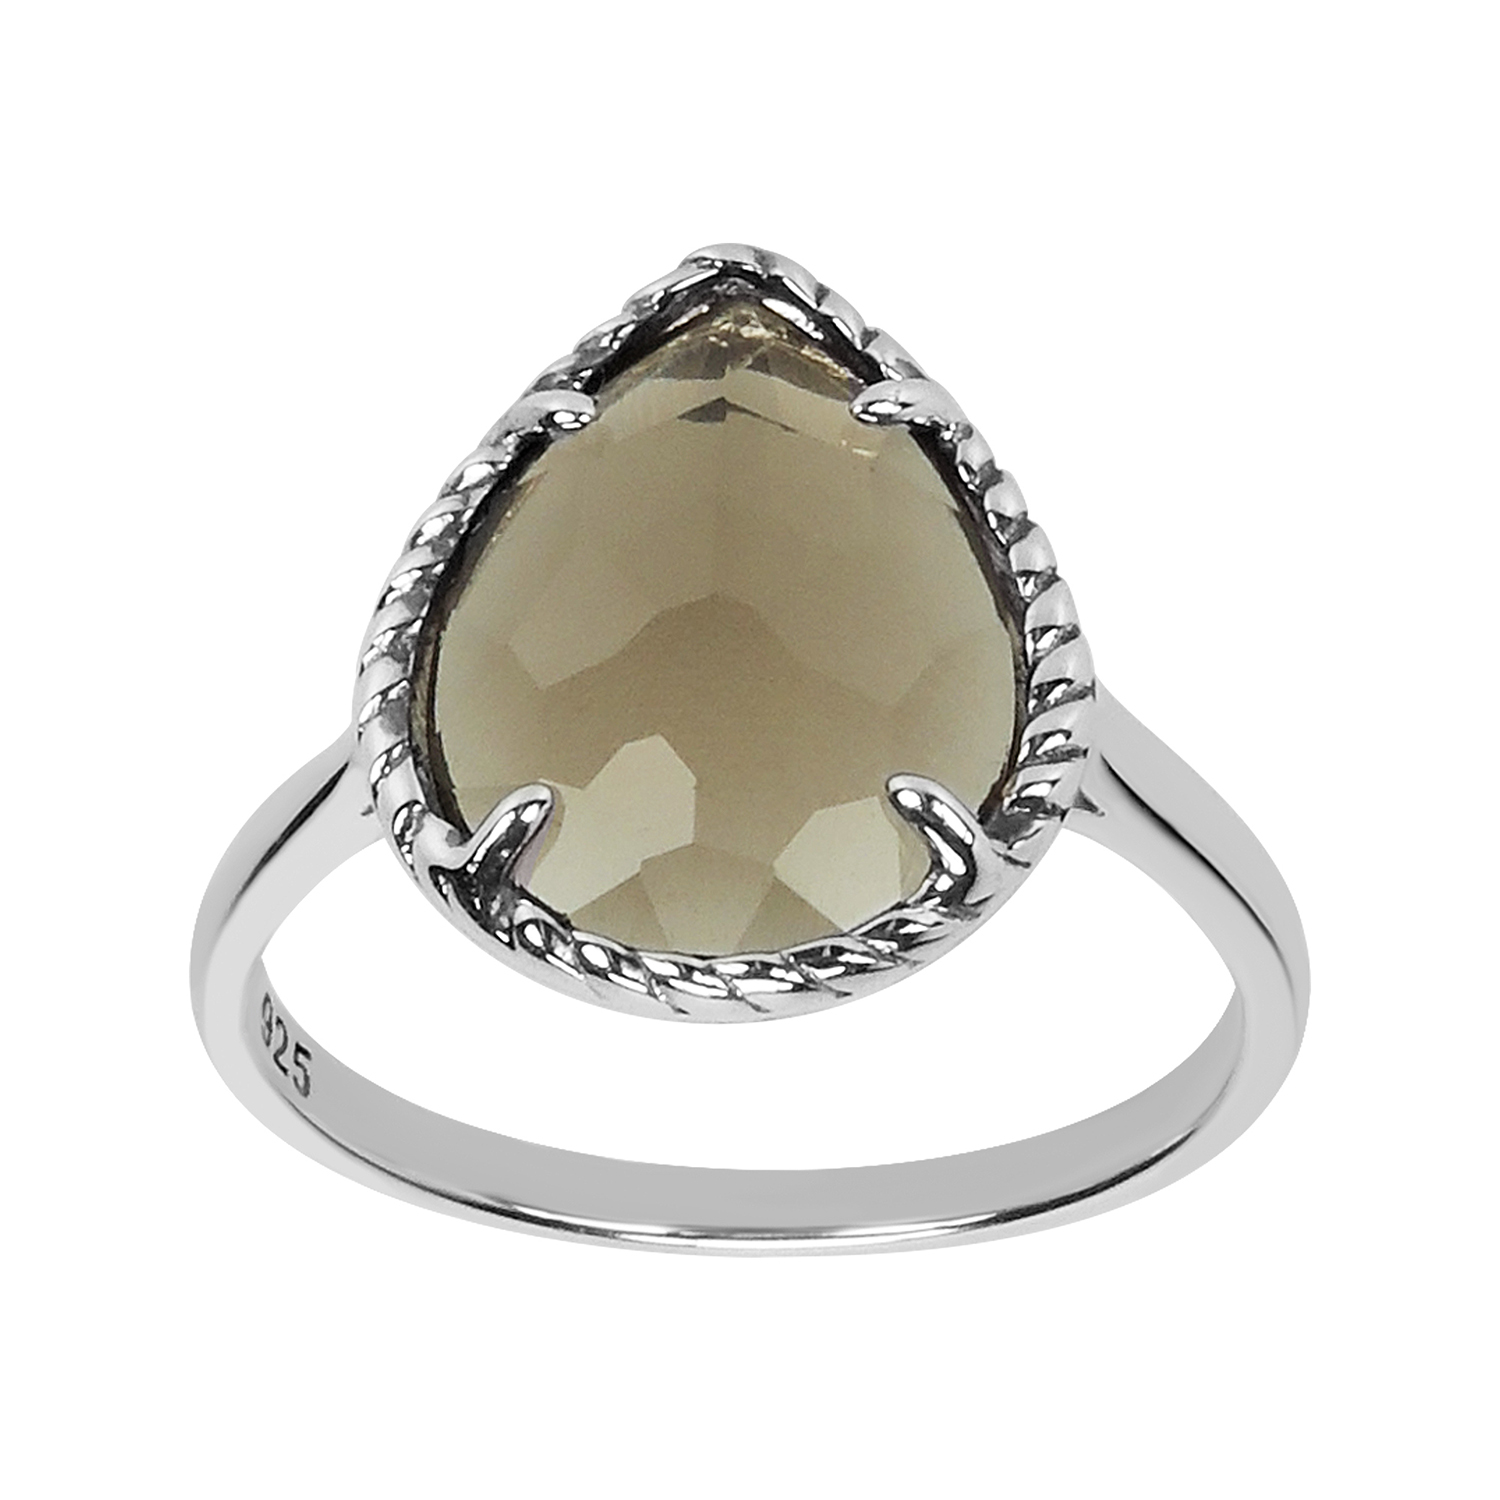 AURA Shop Holiday Deals on Womens Rings 